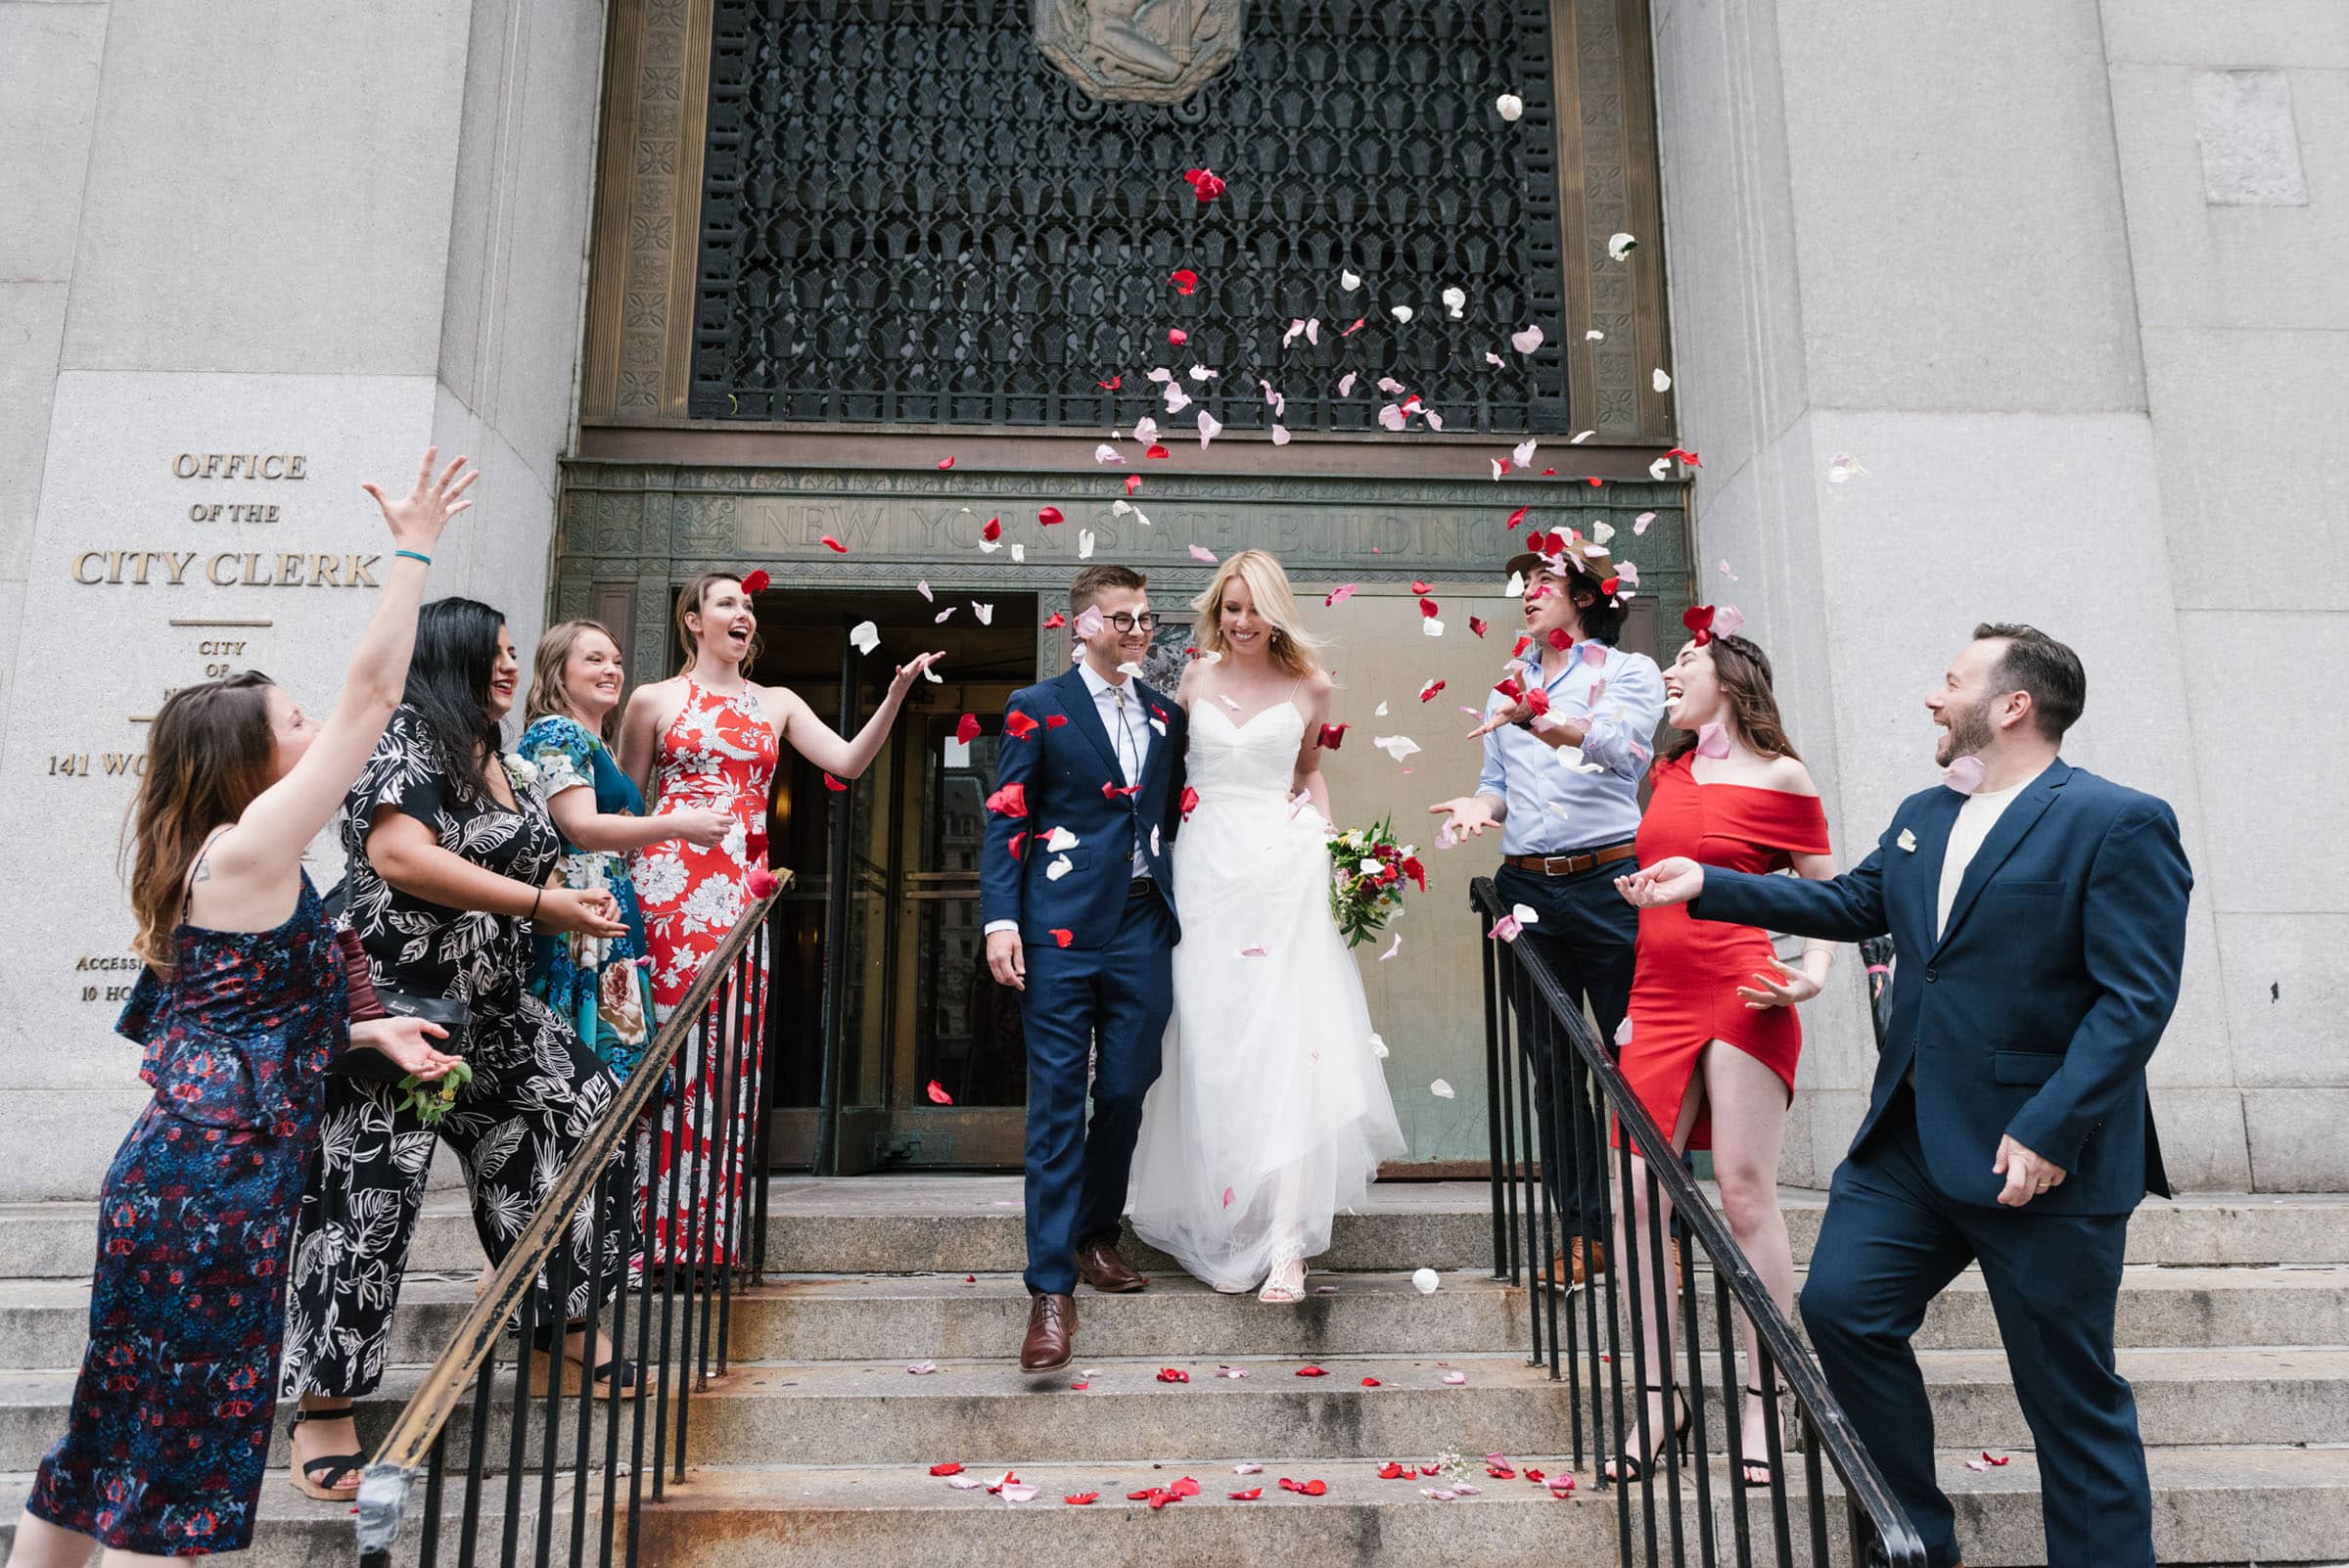 NYC Elopement Packages: NYC City Hall wedding